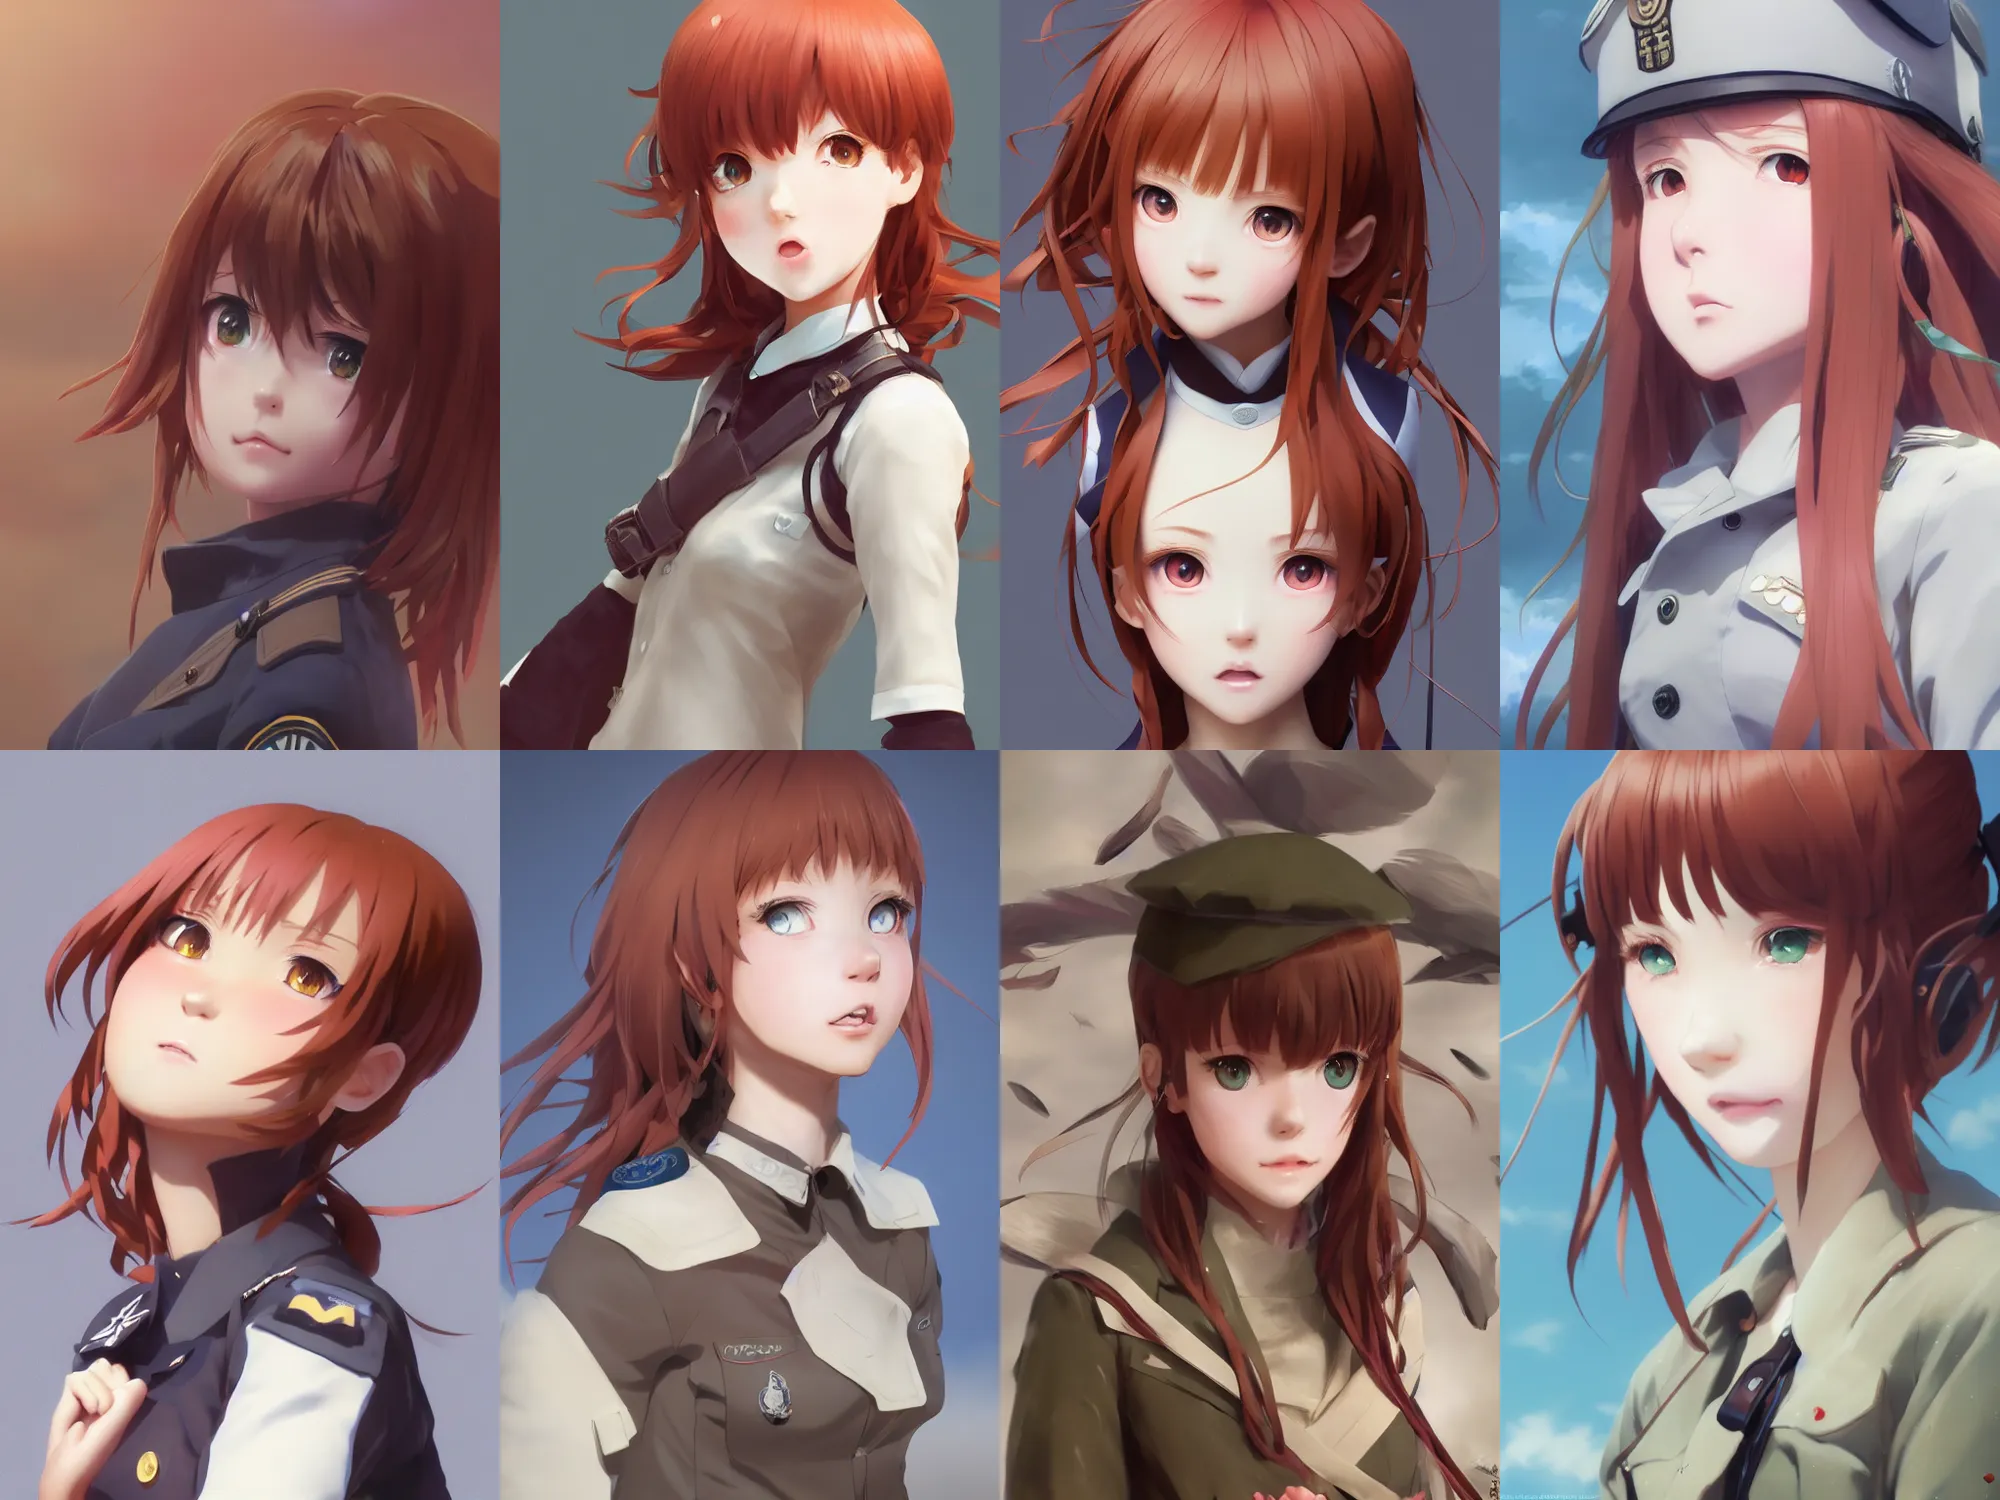 Prompt: Very complicated dynamic composition, realistic anime style at Pixiv CGSociety by WLOP, ilya kuvshinov, krenz cushart, Greg Rutkowski, trending on artstation. Zbrush sculpt colored, Octane render in Maya and Houdini VFX, close-up portrait of young redhead girl in motion, cute, innocent, she expressing joy, wearing military uniform, silky hair, stunning deep eyes. Very expressive and inspirational. Amazing textured brush strokes. Cinematic dramatic atmosphere, soft volumetric studio lighting